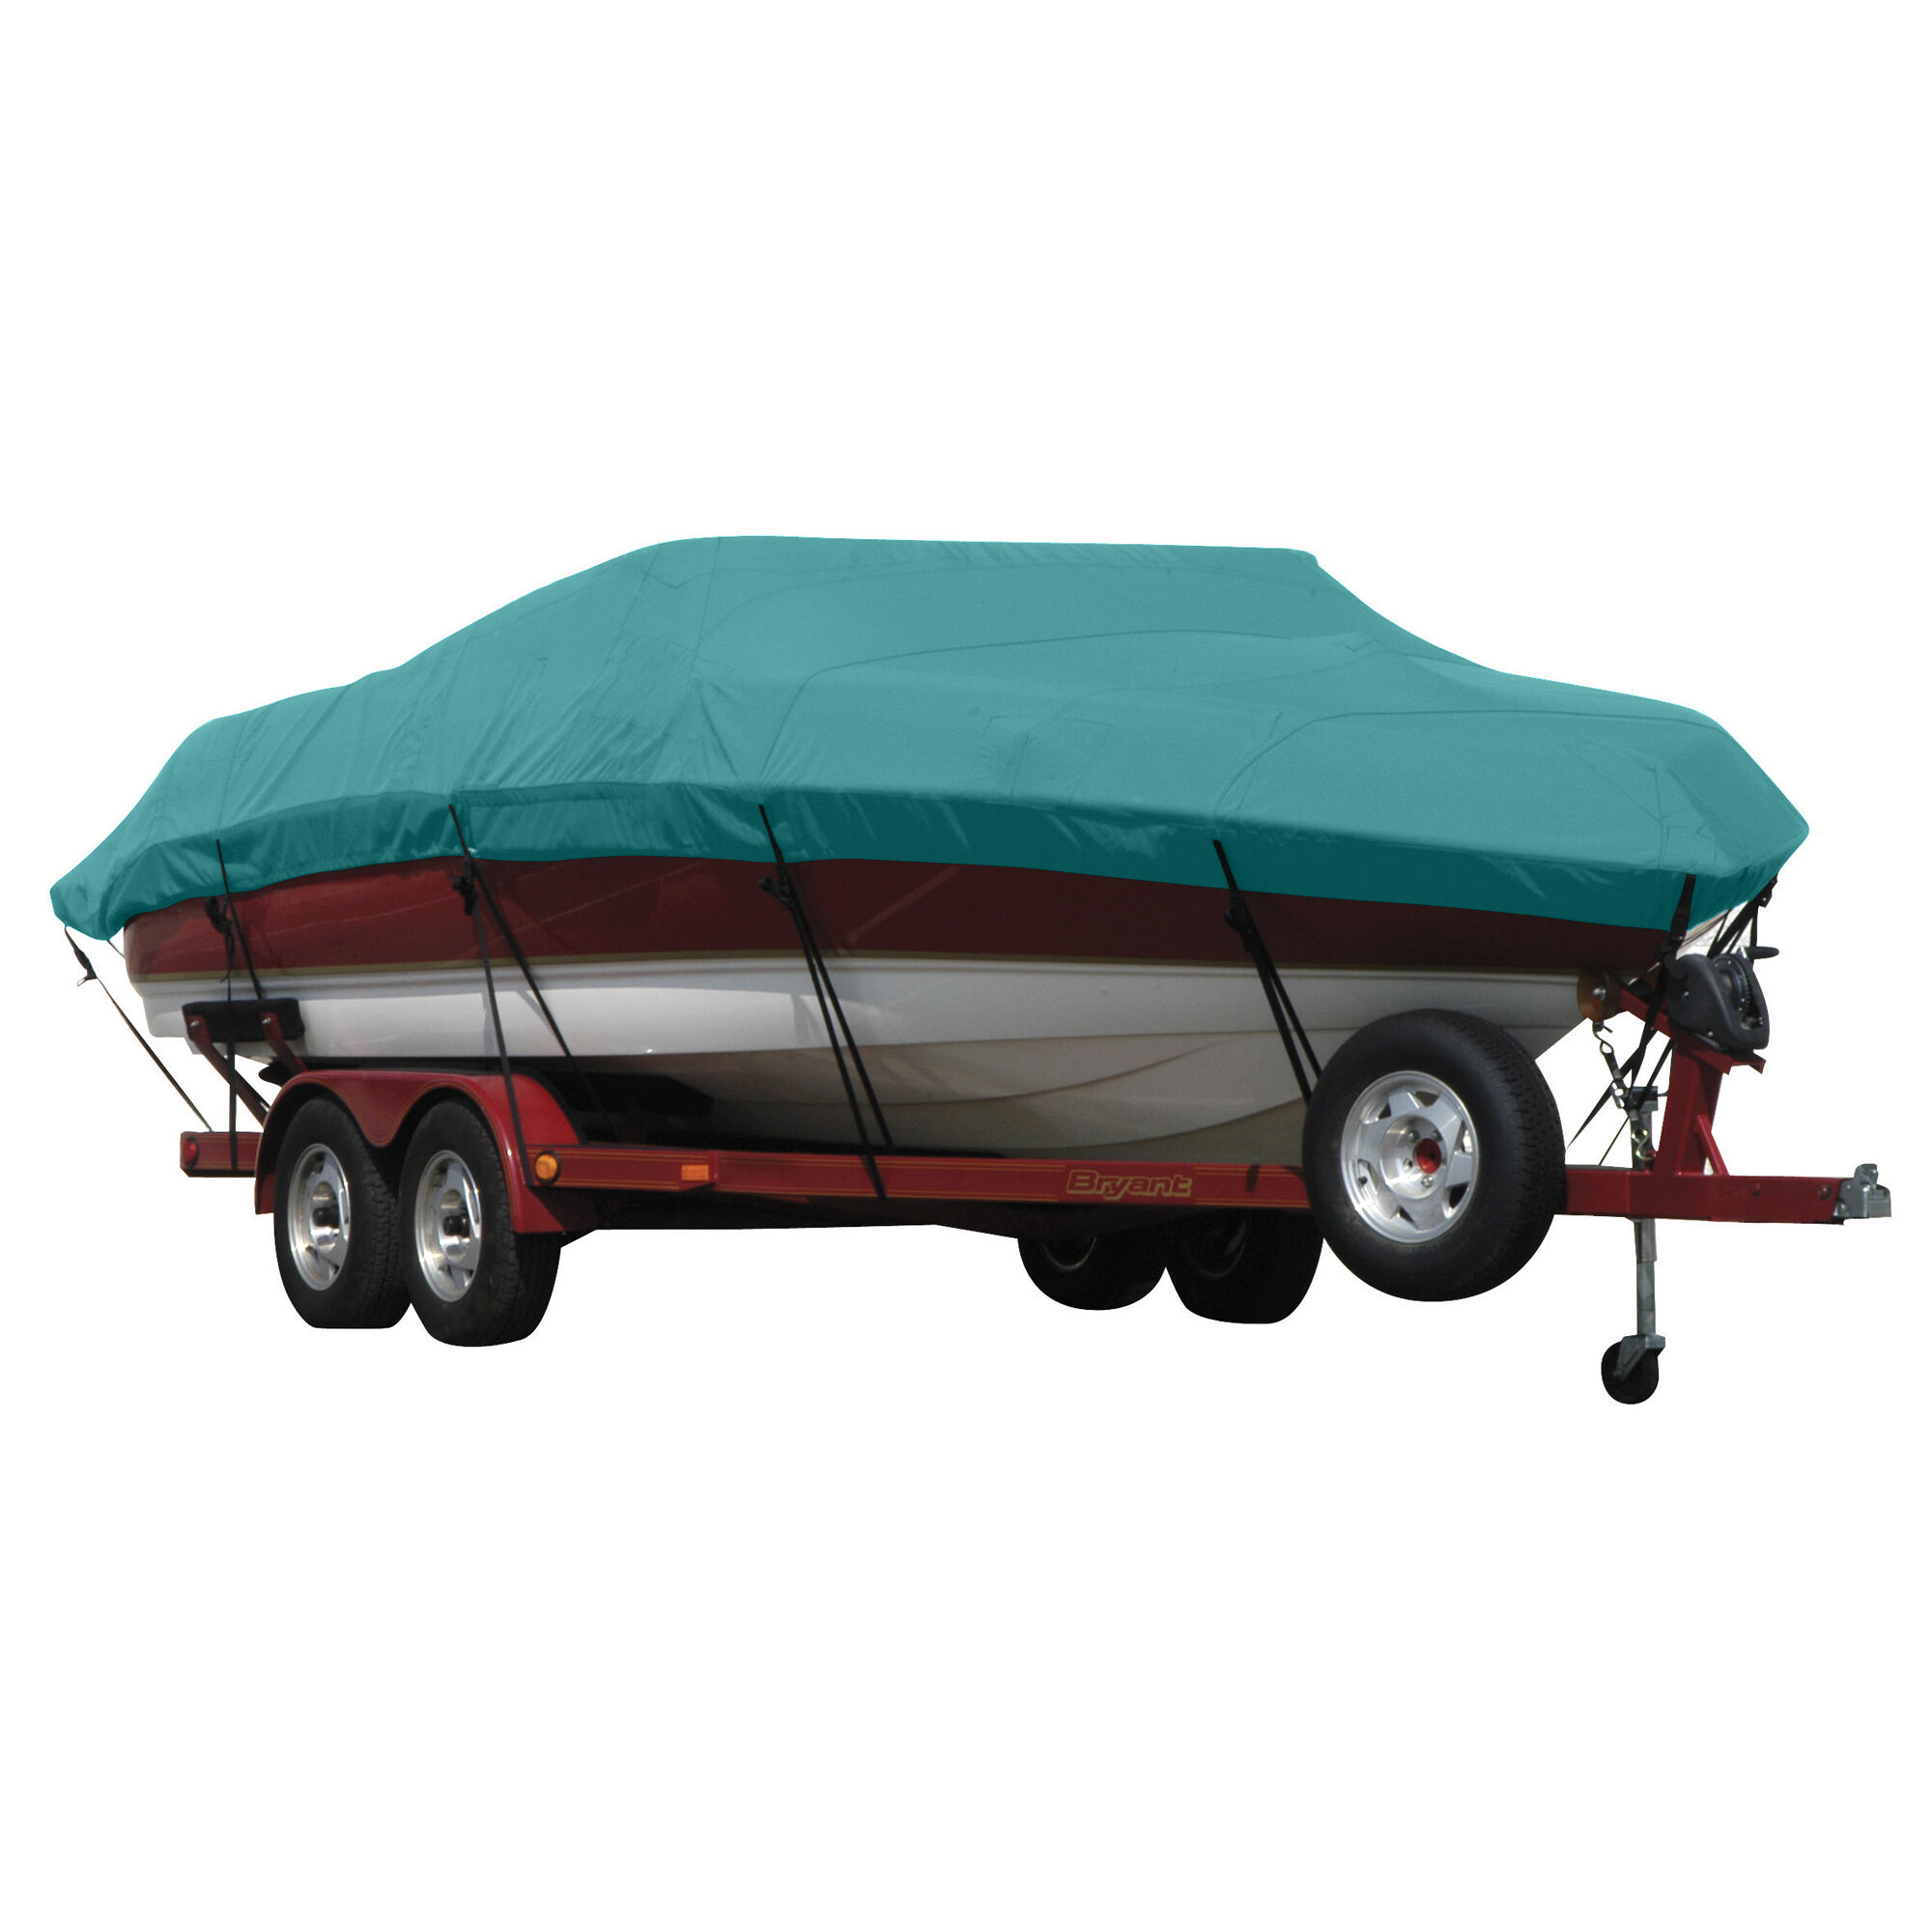 Covermate Exact Fit Sunbrella Boat Cover For SANGER V210 DOES NOT COVER PLATFORMM in Aqua Blue